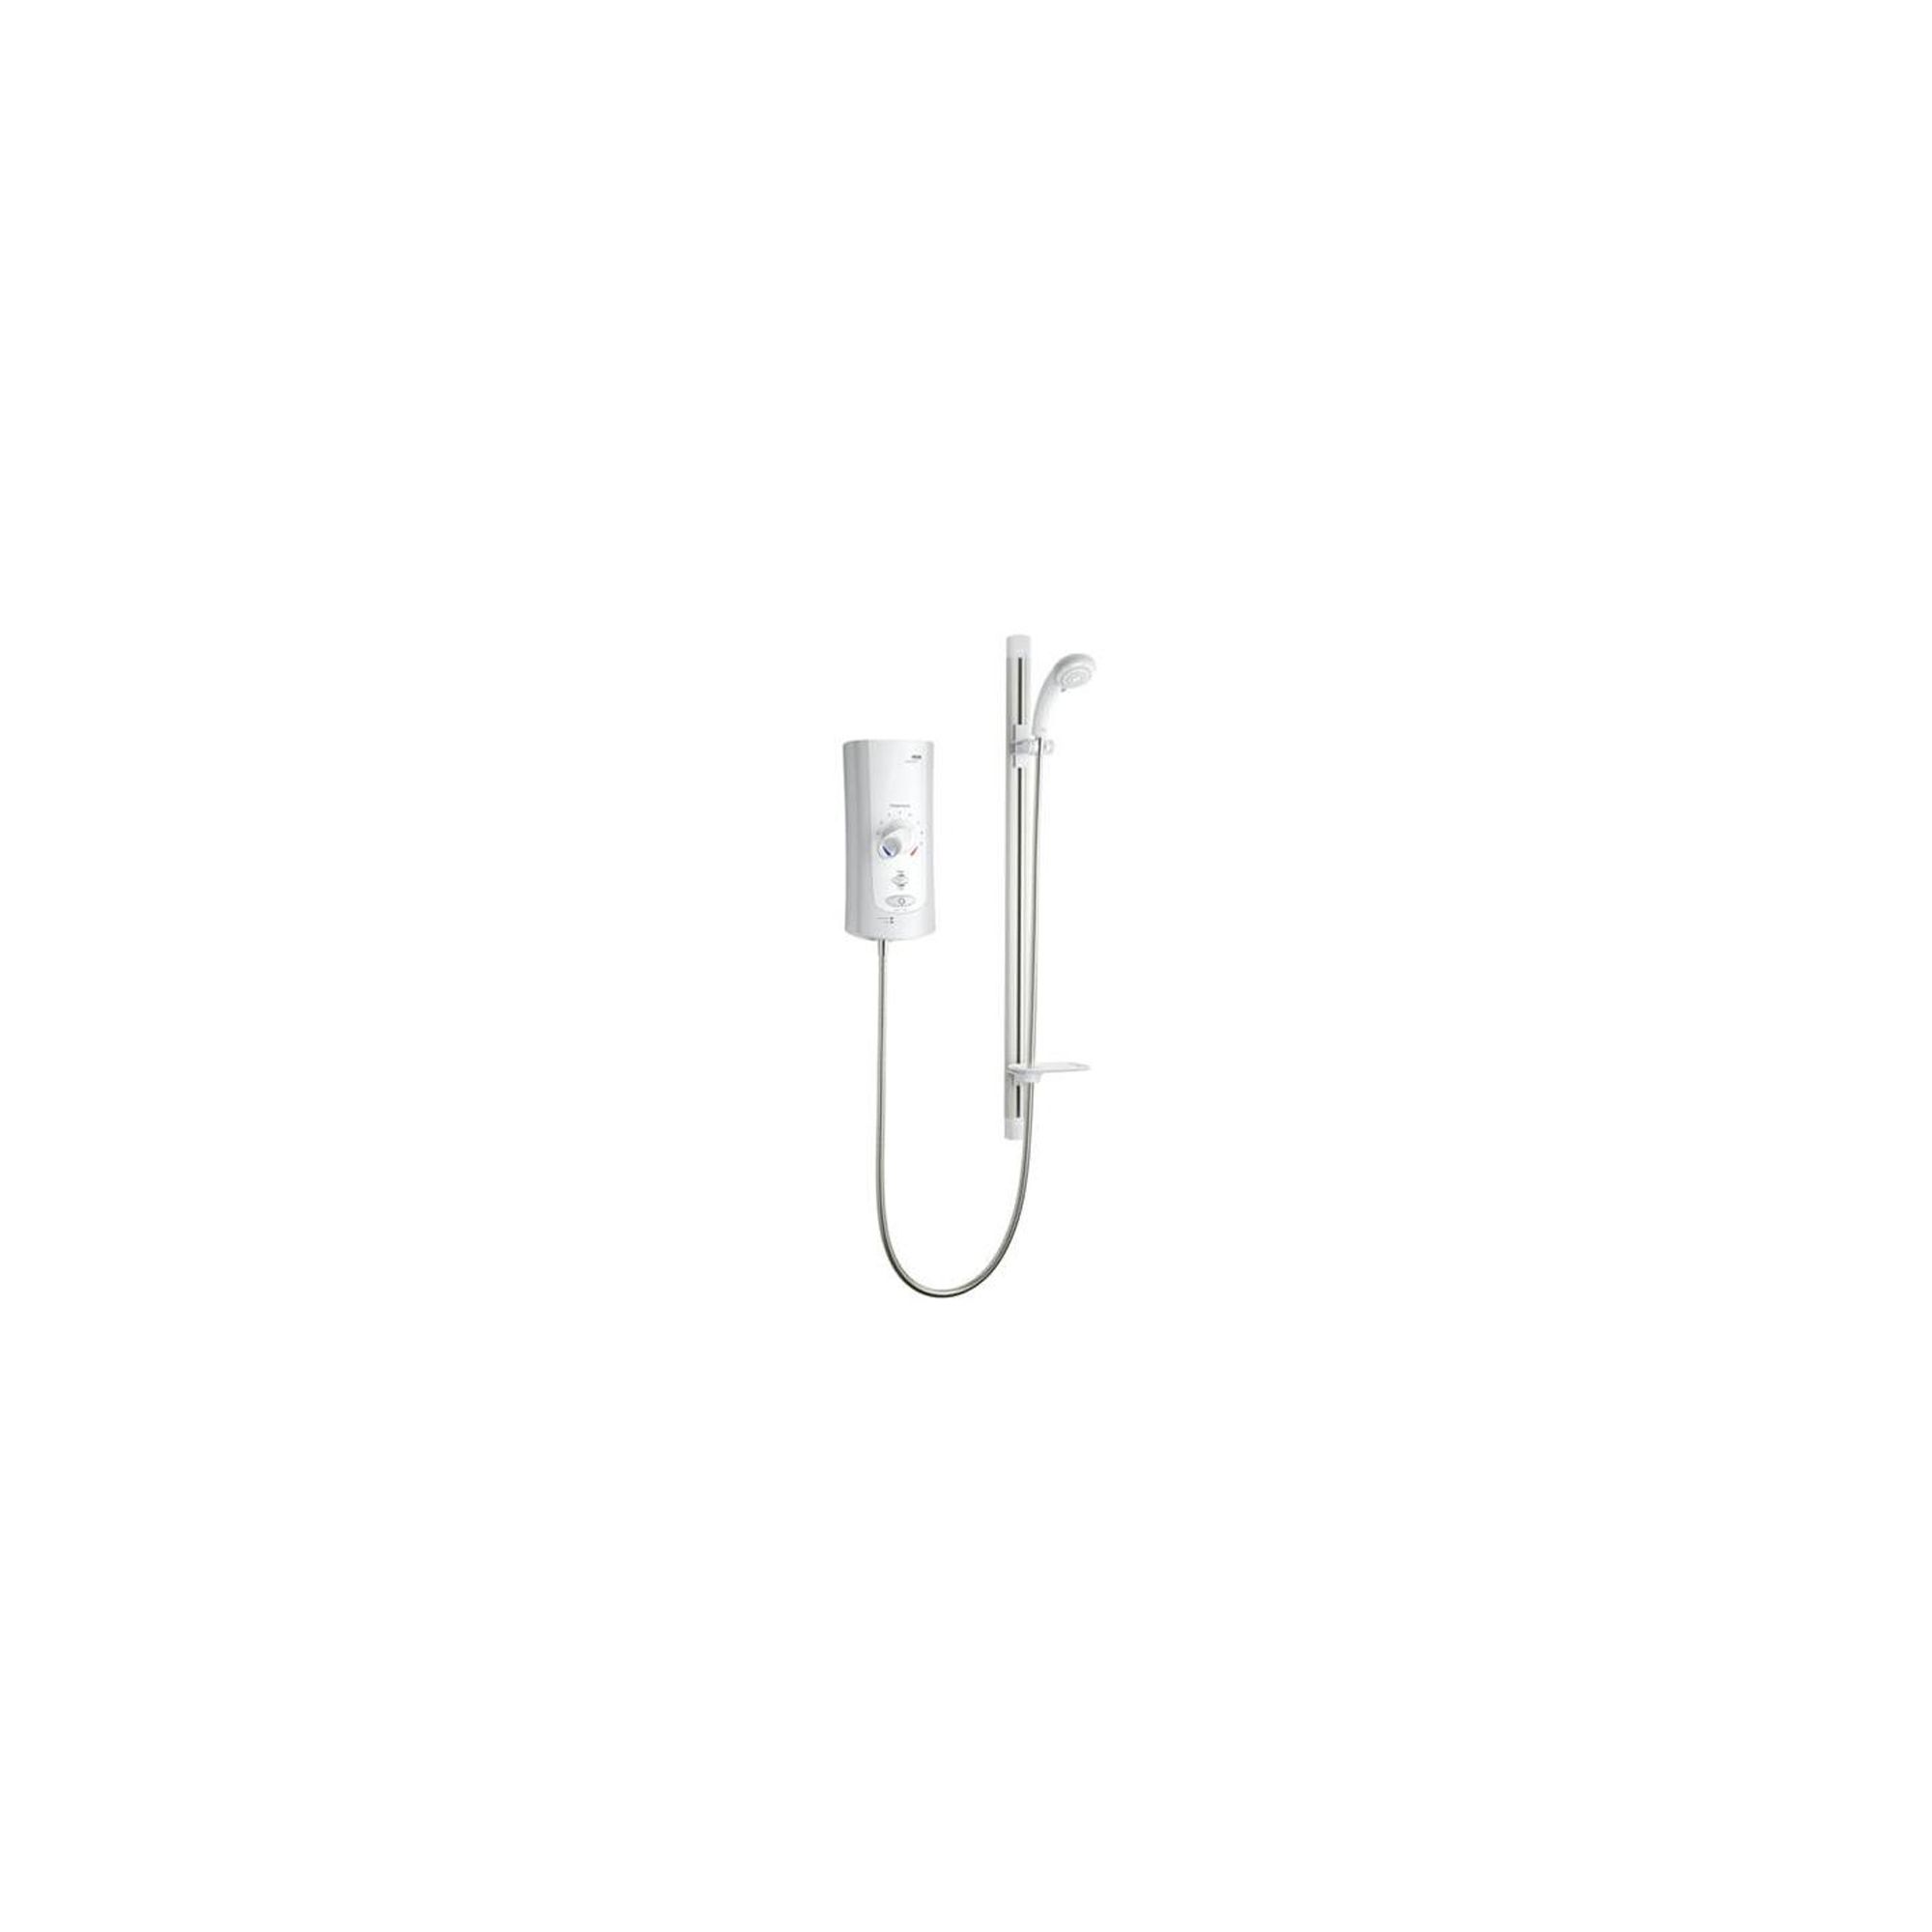 Mira Advance ATL Flex Extra 9.0 kW Electric Shower, White/Chrome at Tescos Direct